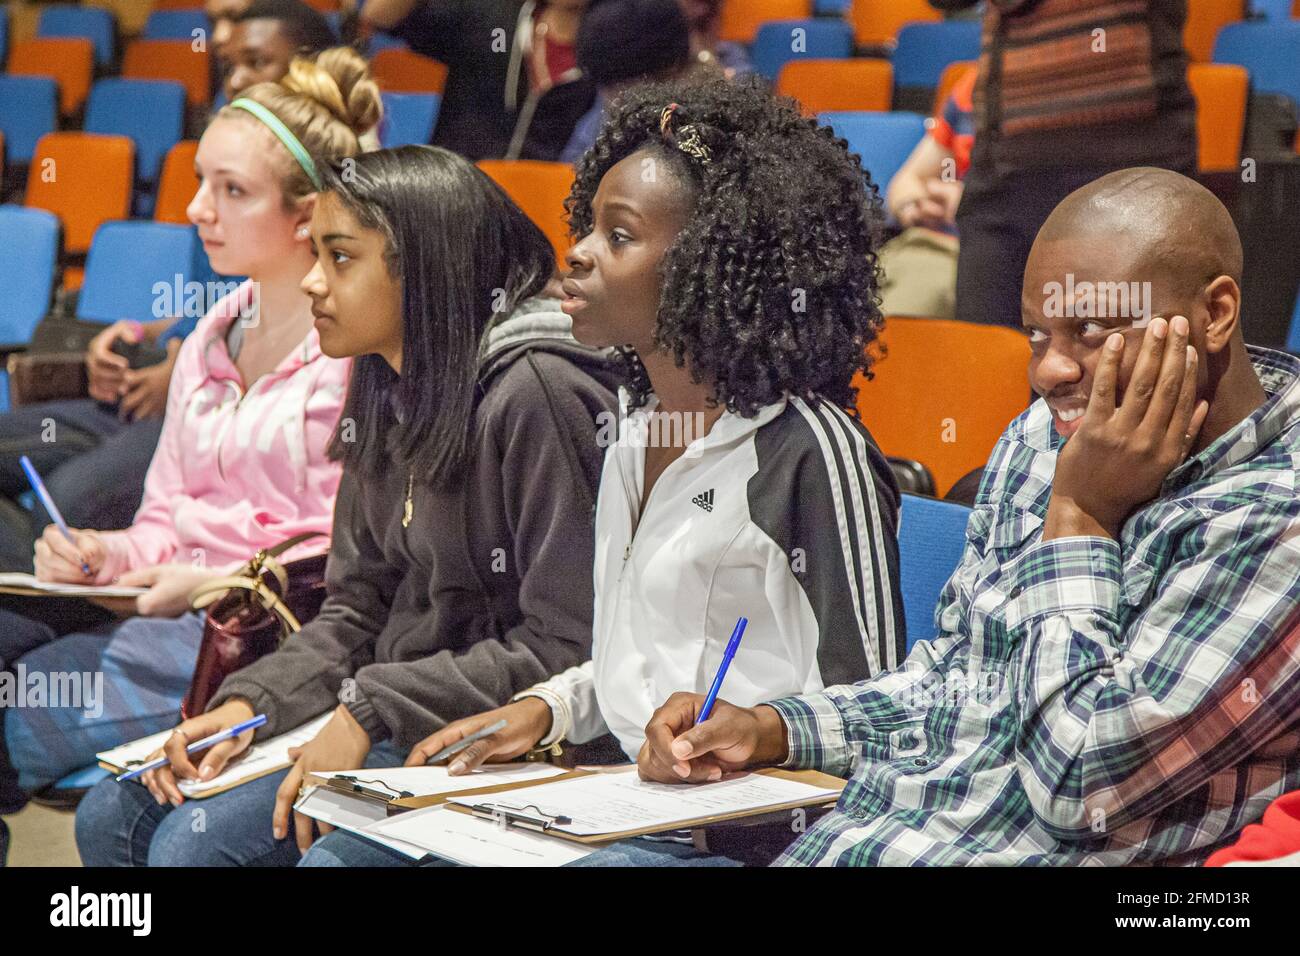 Students listening to a lecture in an auditorium Stock Photo